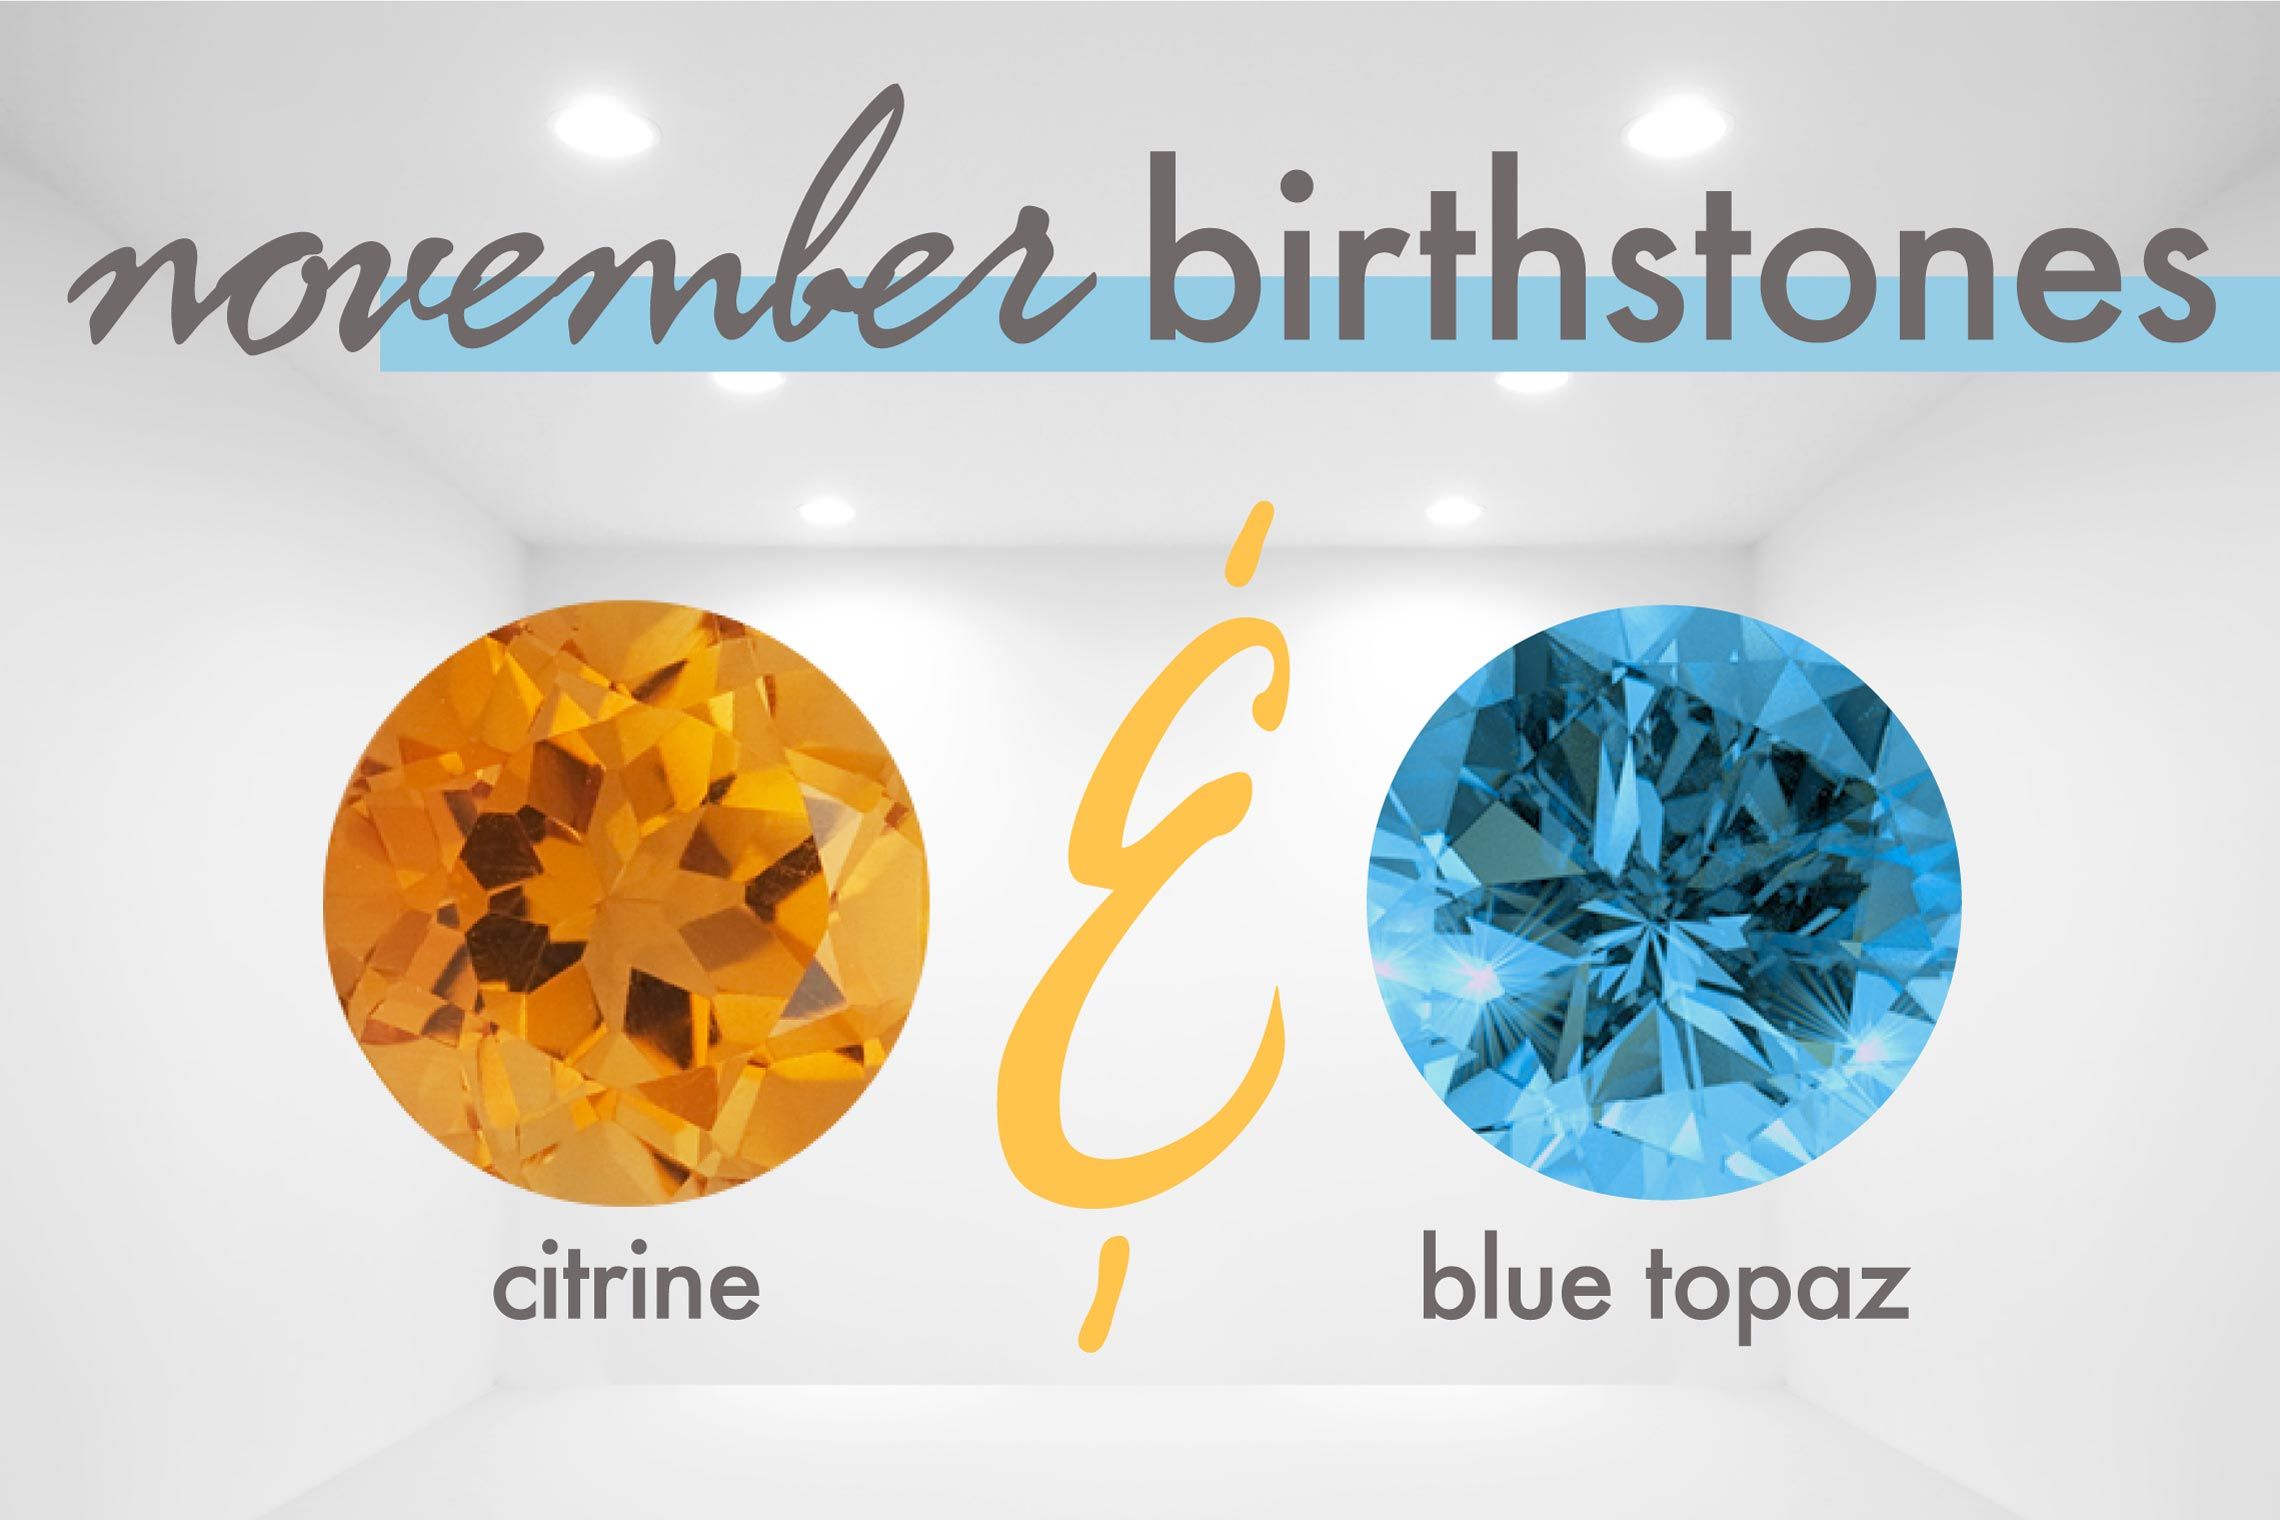 The birthstones for November are Citrine and Topaz. Citrine is a warm